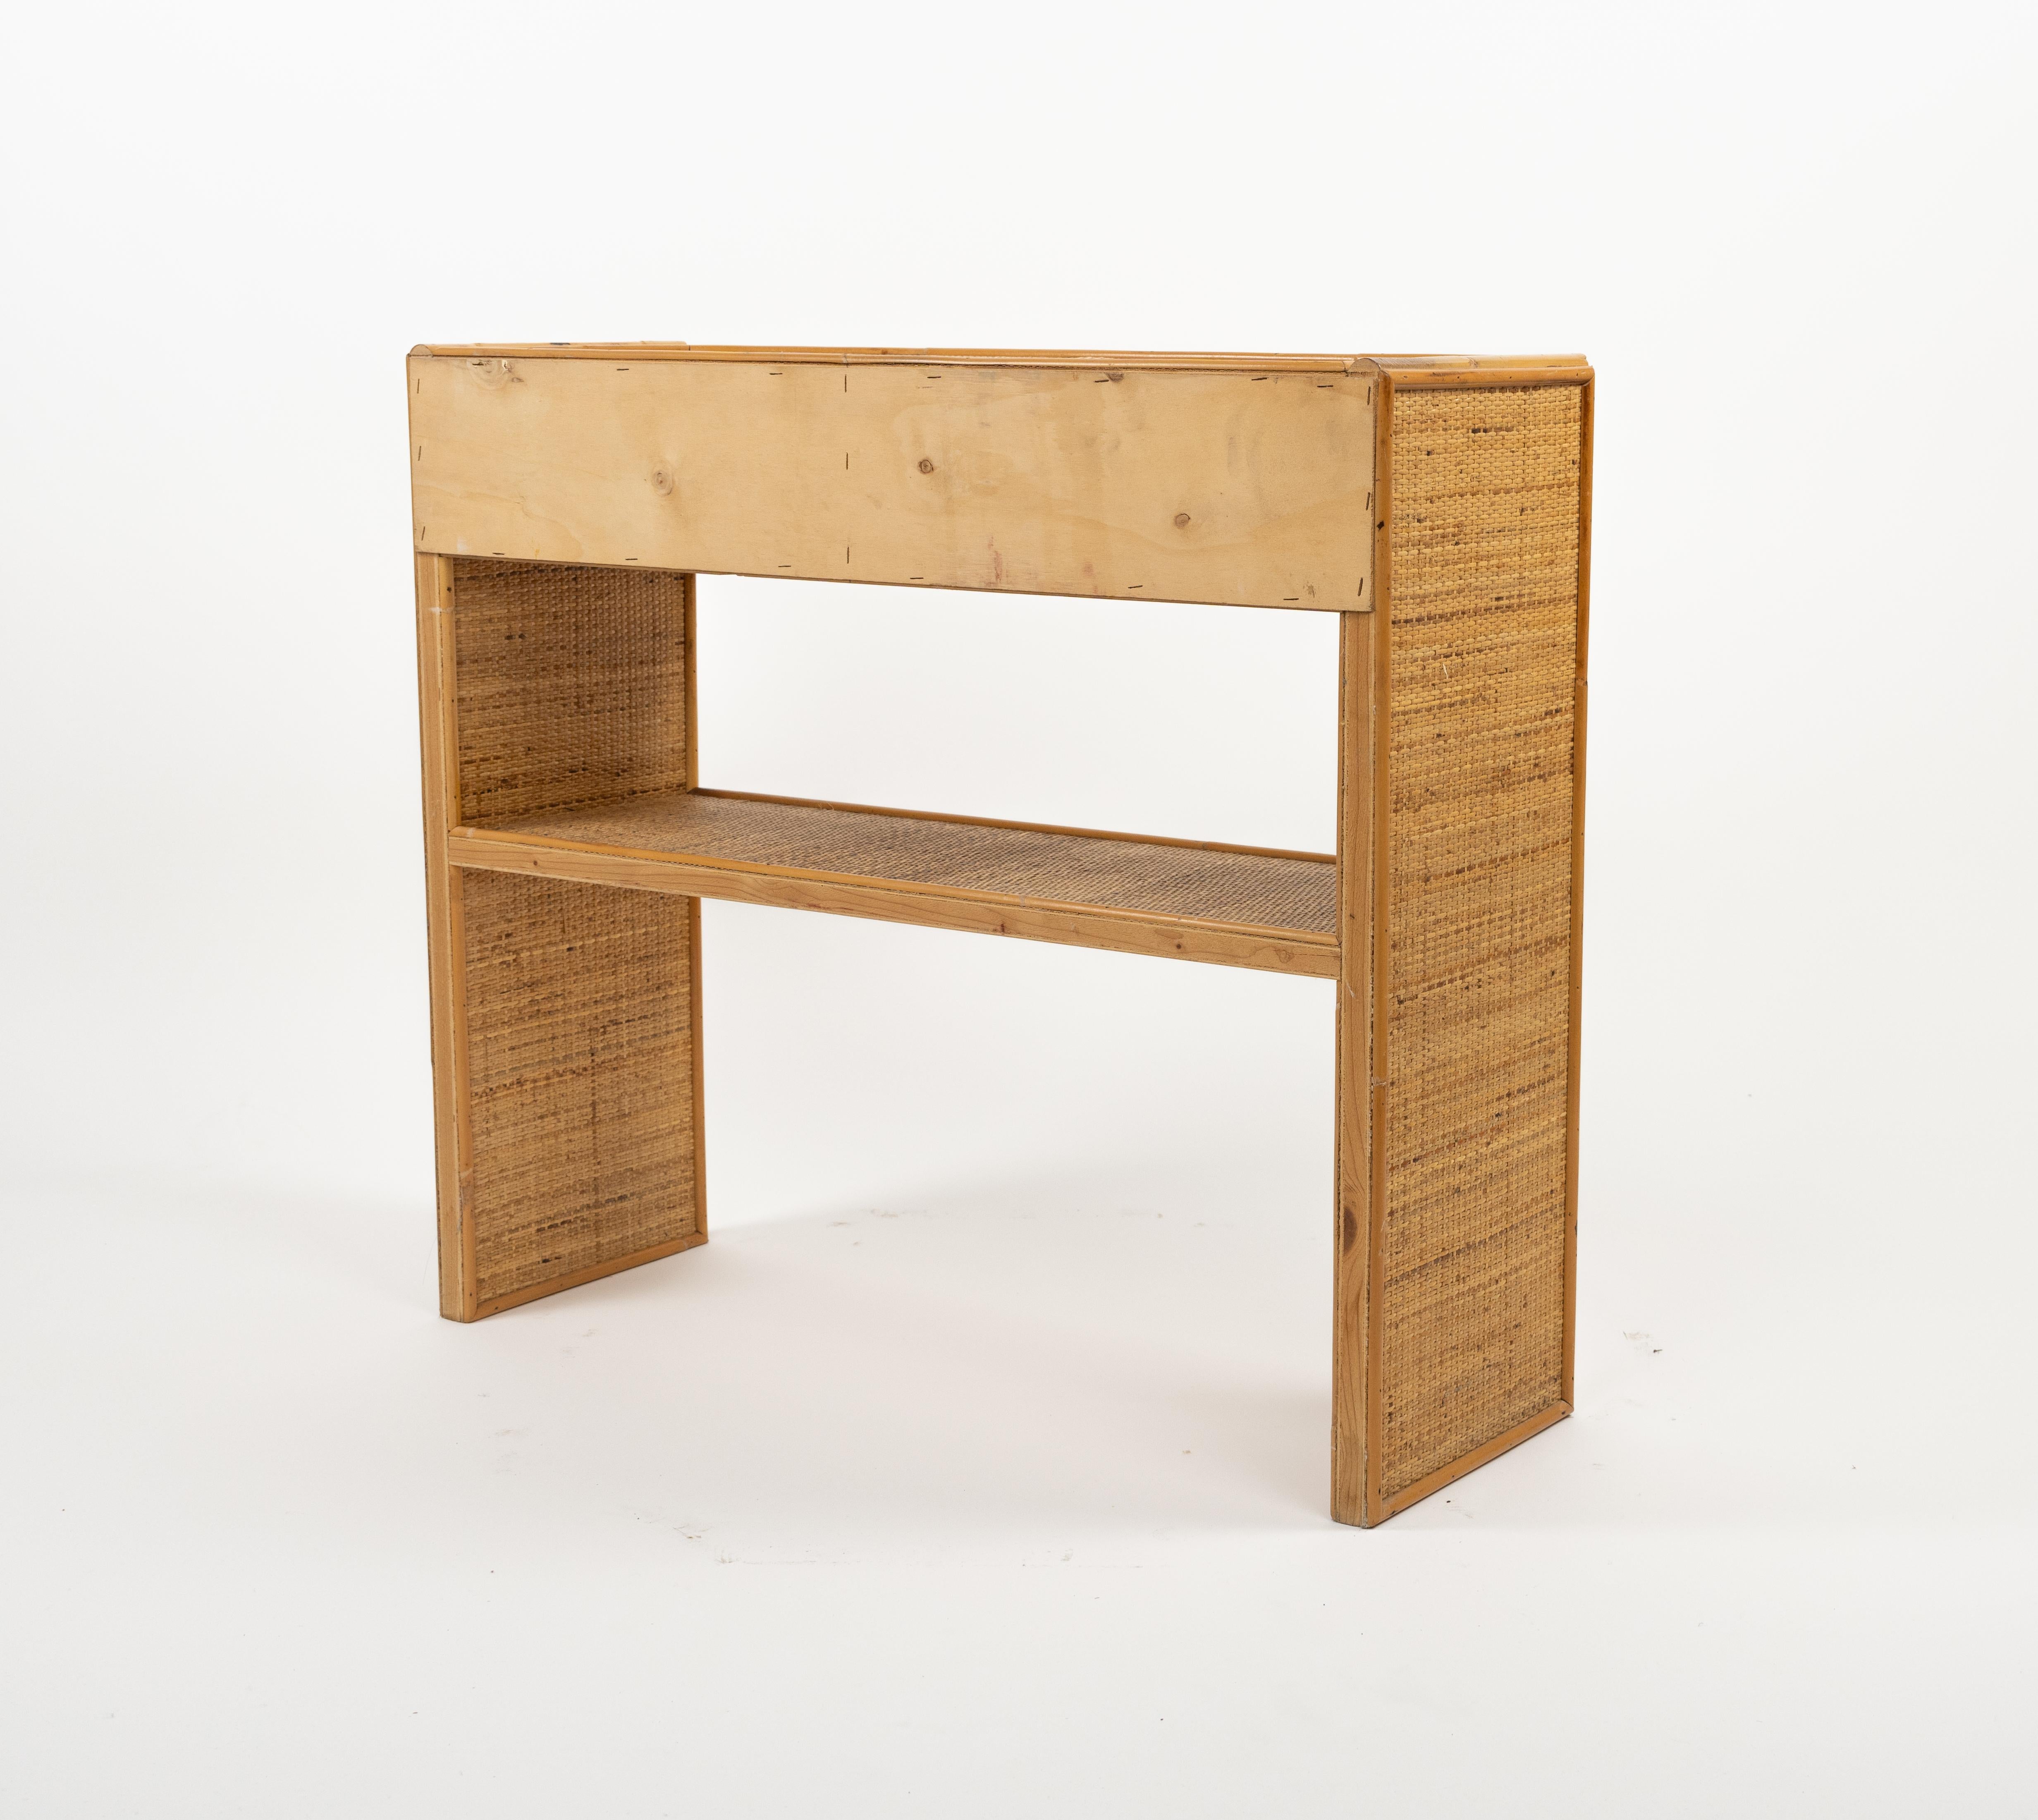 Midcentury Bamboo and Rattan Console Table with Drawers, Italy 1970s For Sale 10